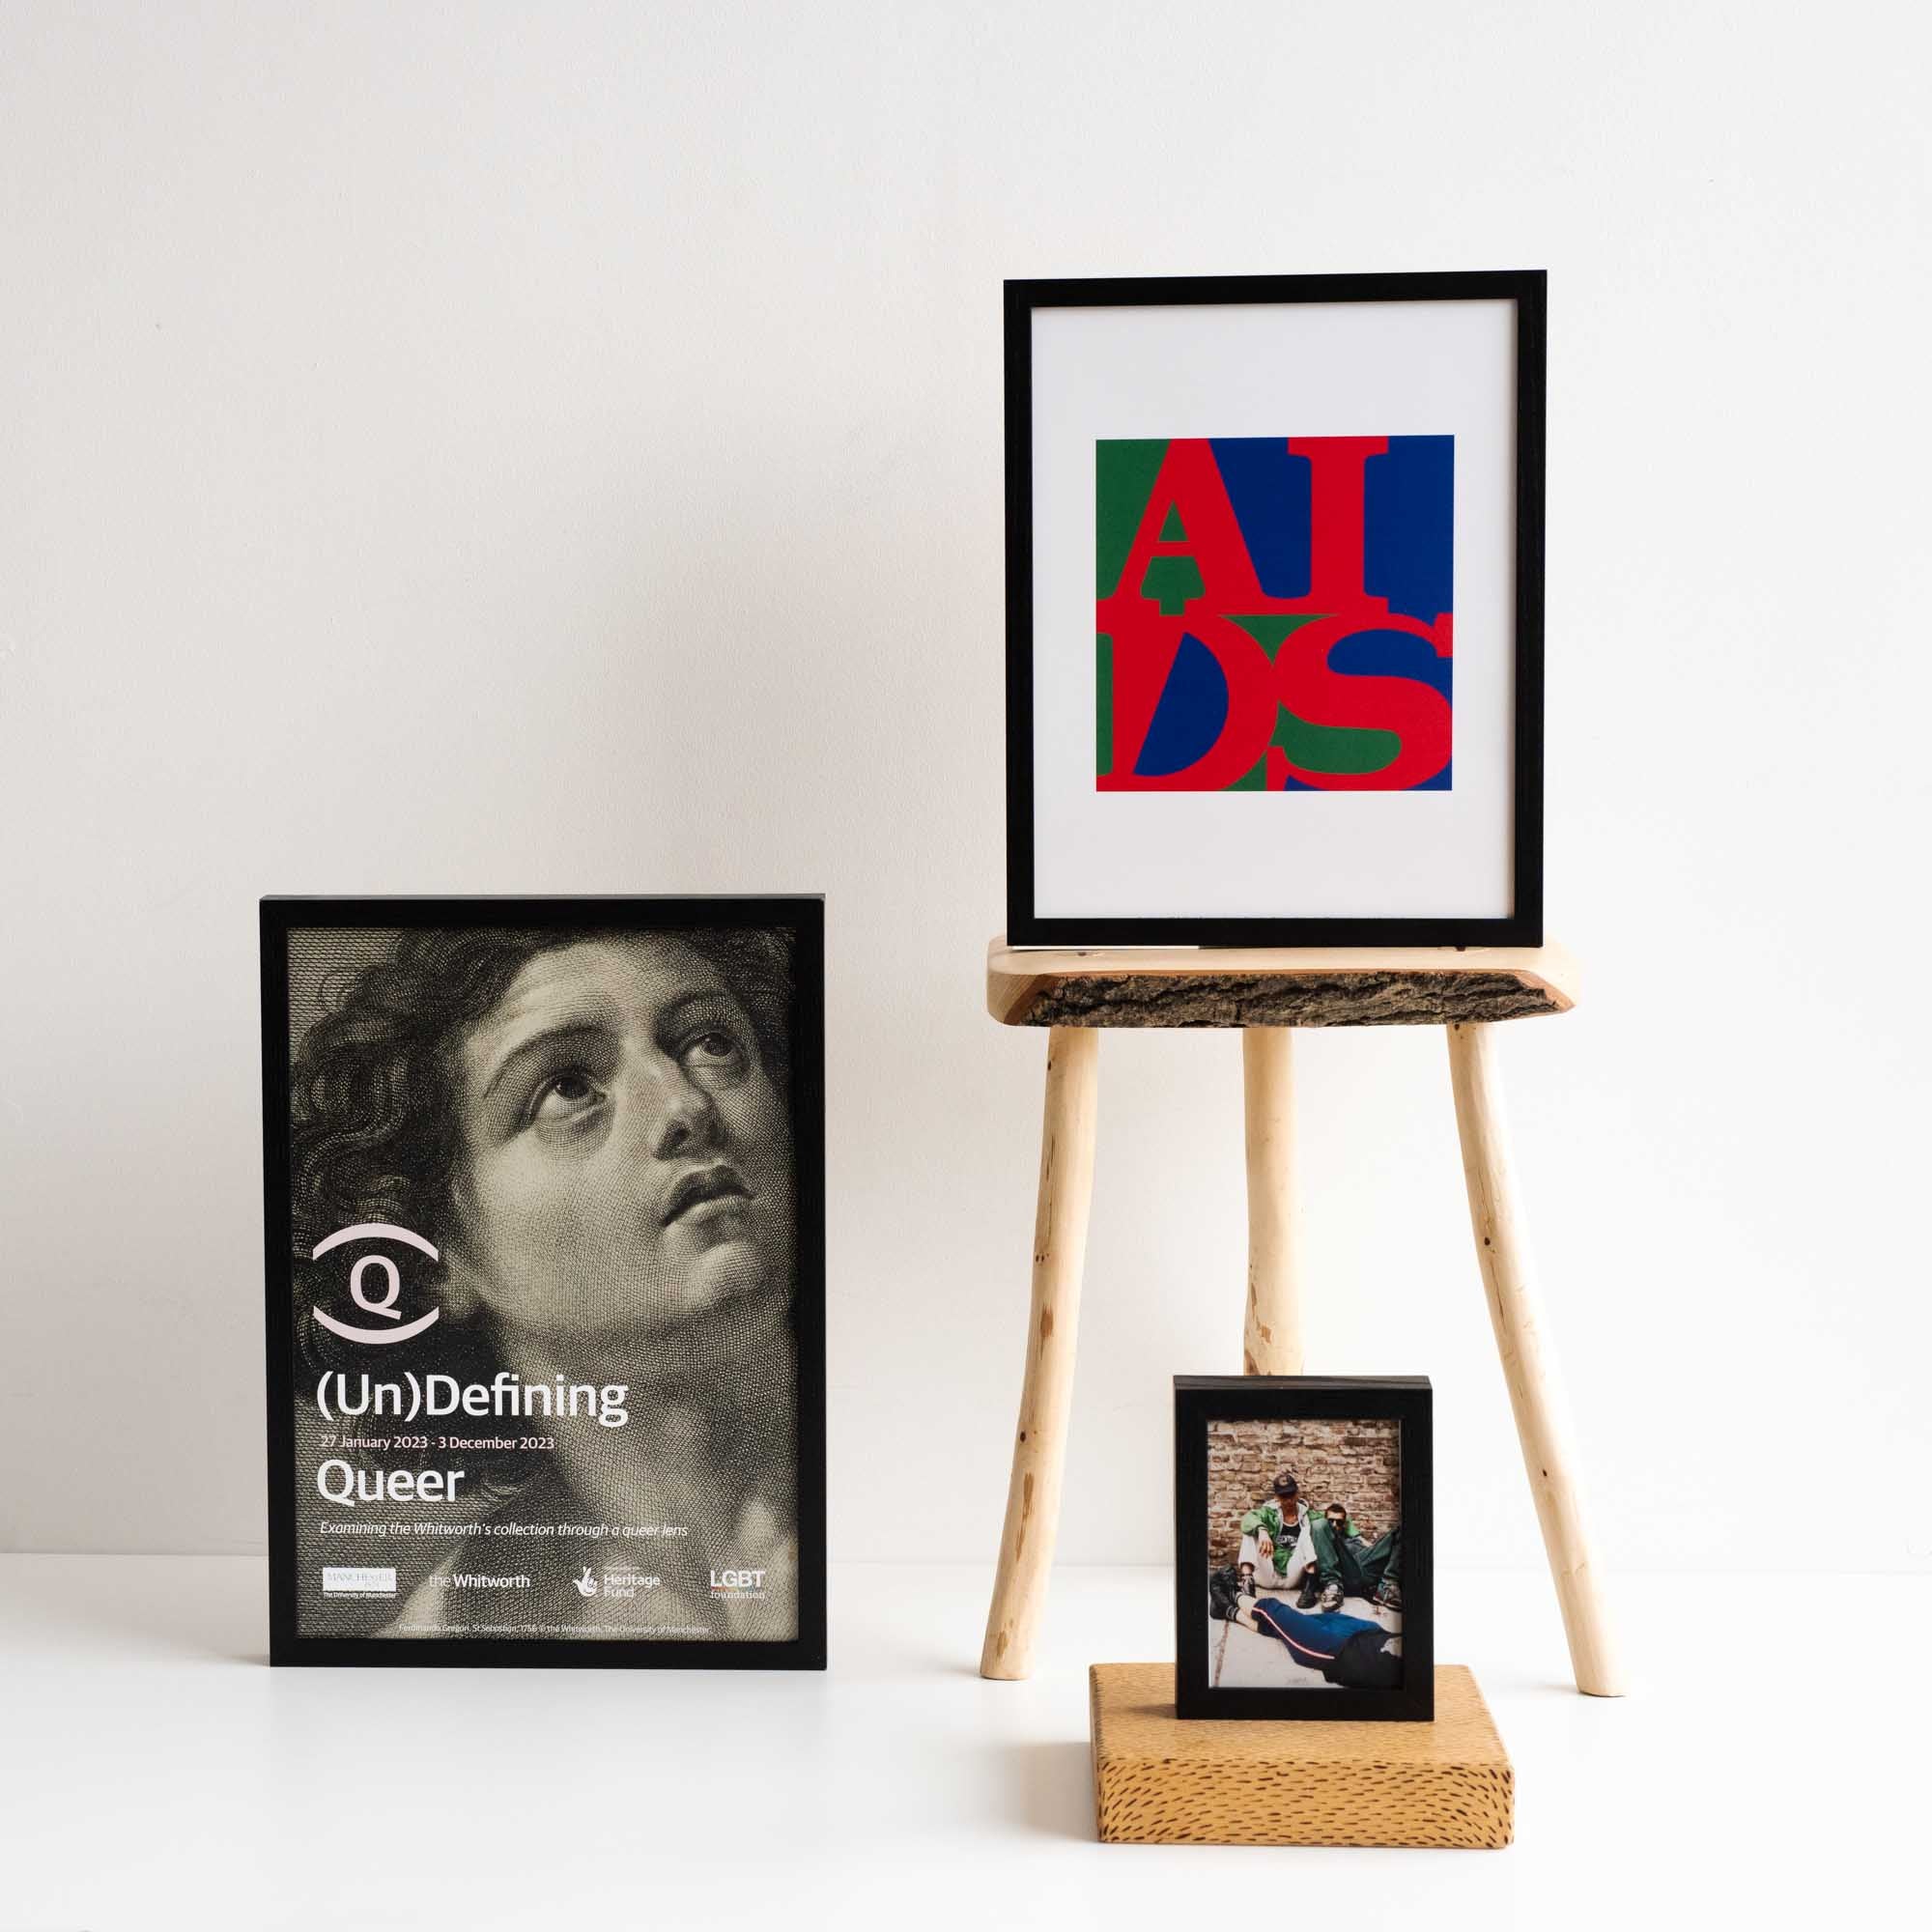 I photo of three framed works in front of a white background